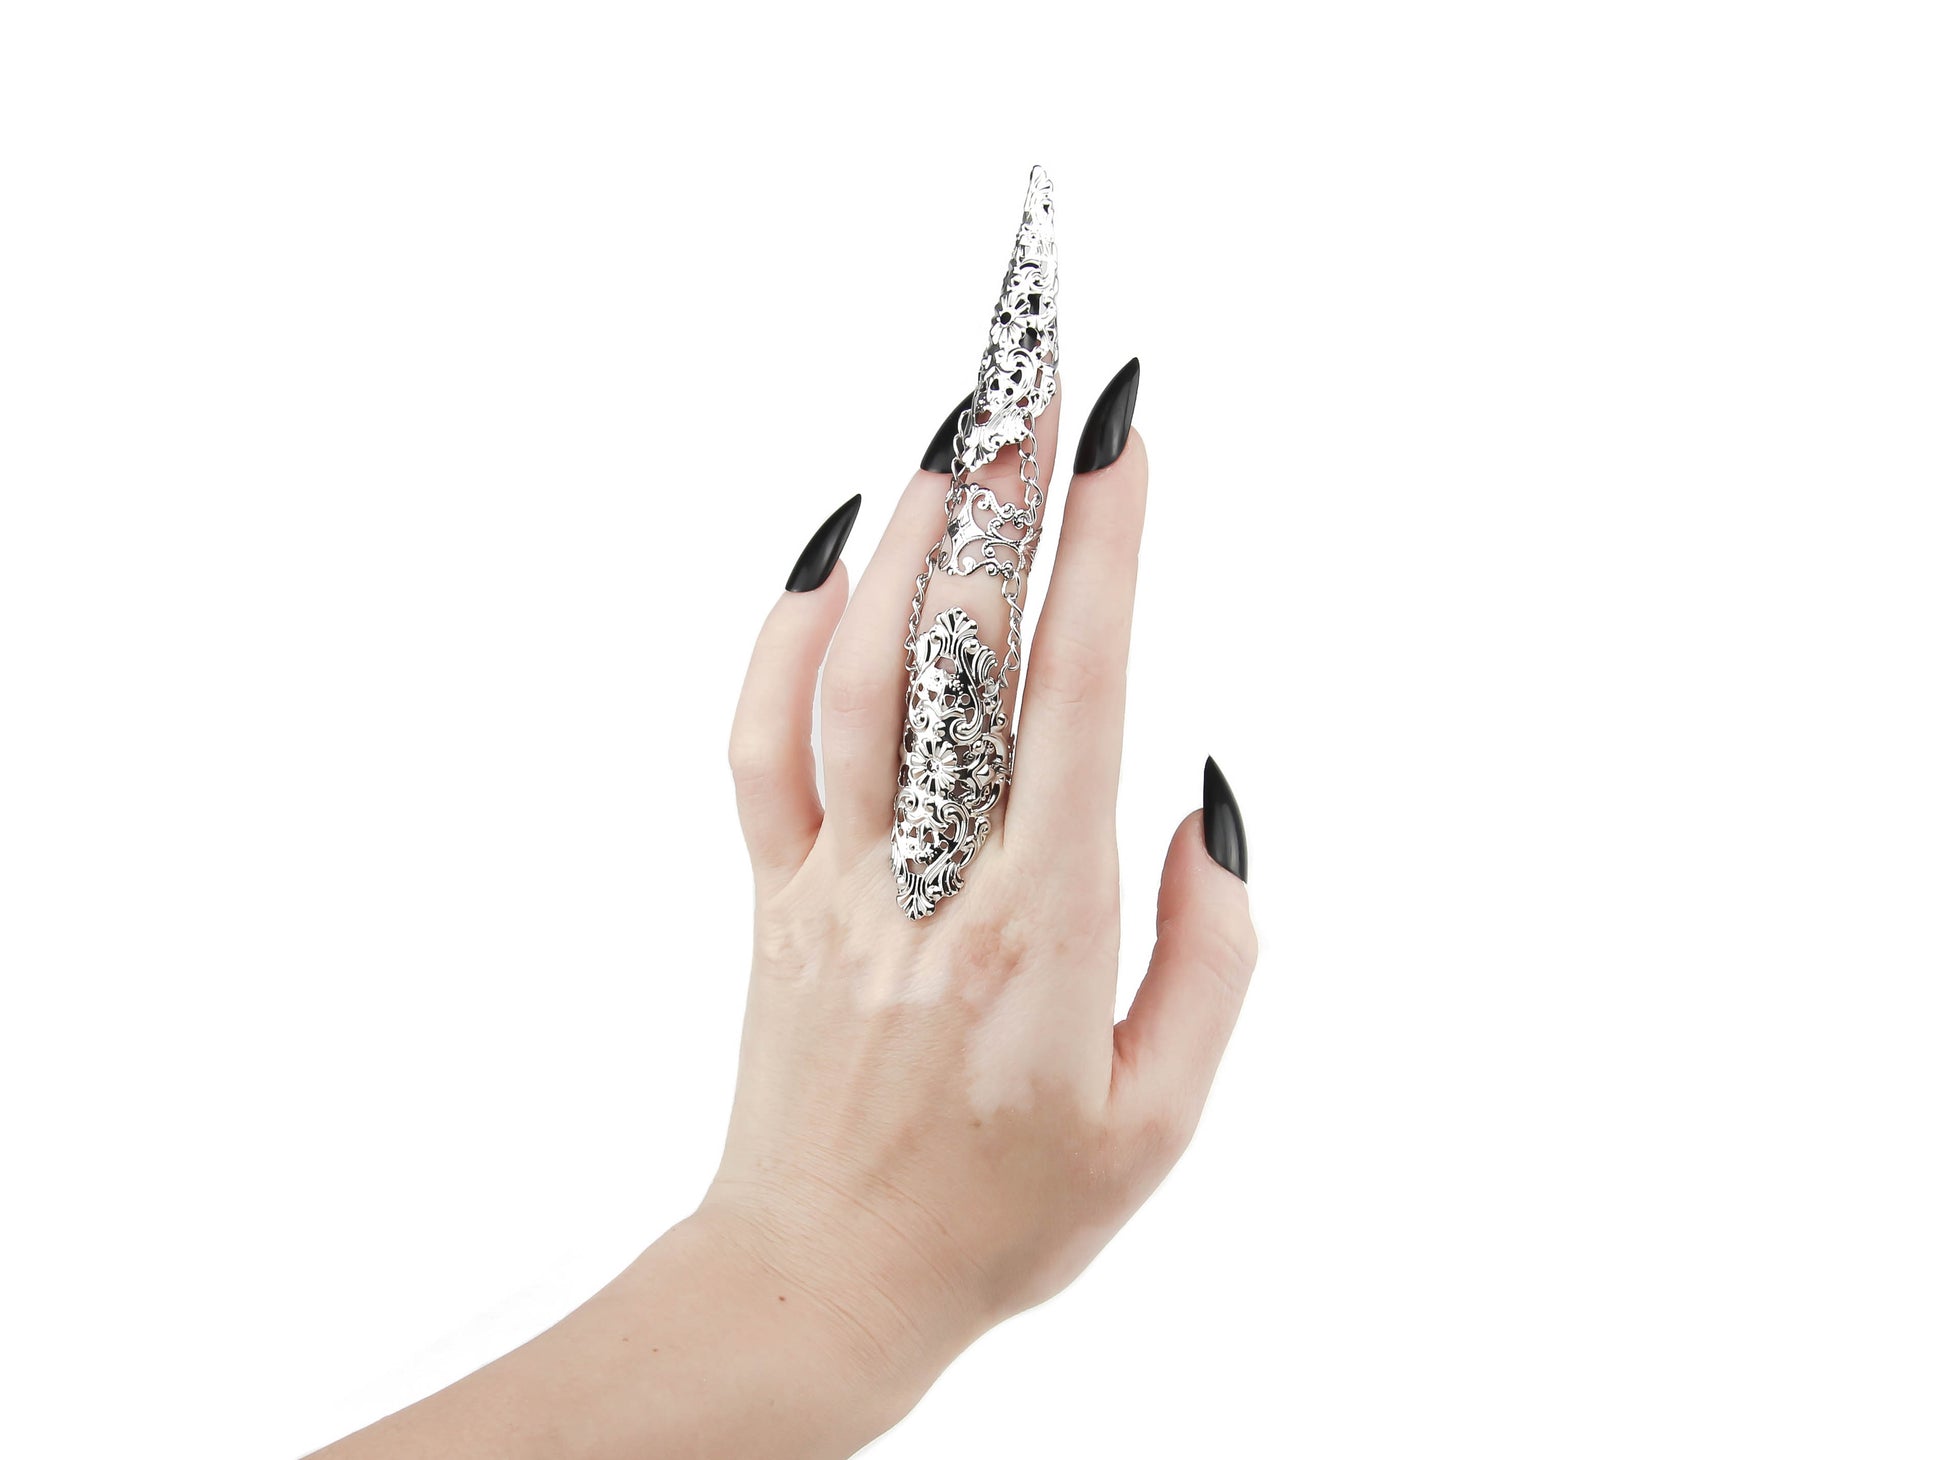 A hand models on the middle finger a striking Myril Jewels articulated finger armor ring, with polished silver filigree detailing perfect for dark-avantgarde and gothic fashion enthusiasts. This Italian-made, handcrafted piece captures the essence of alternative luxury.